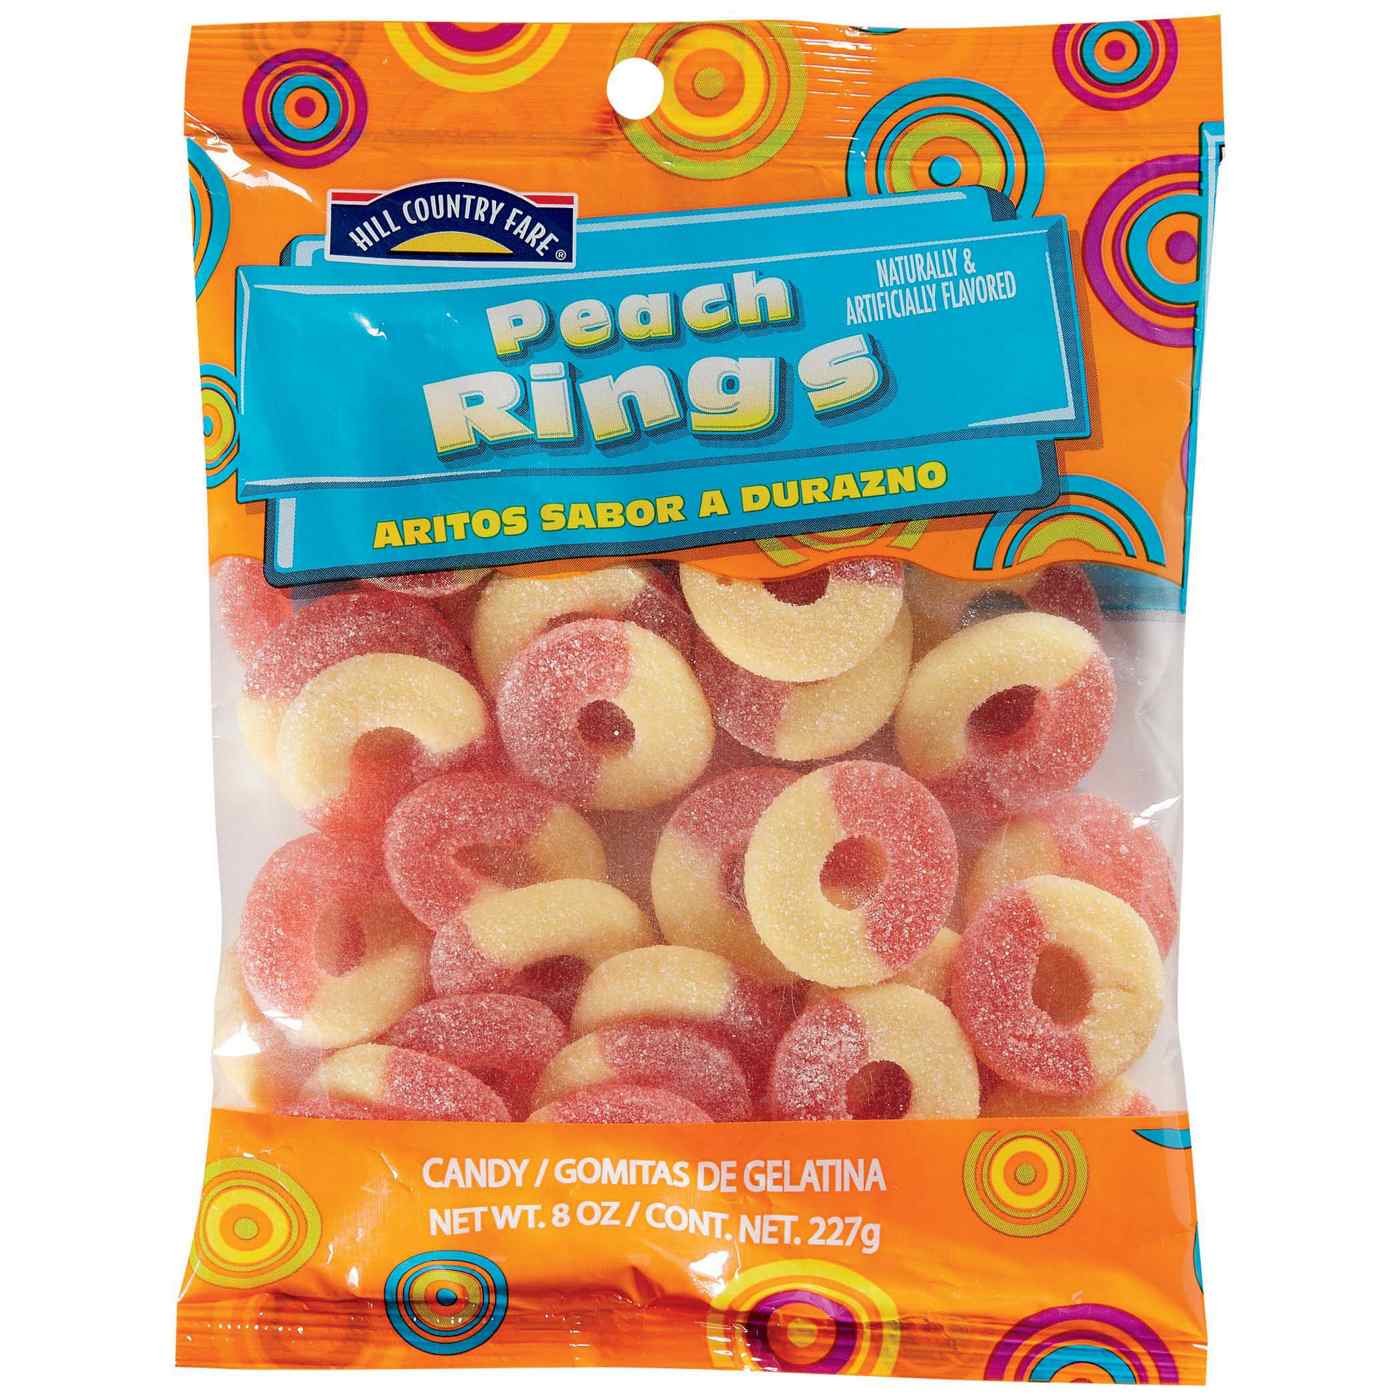 Hill Country Fare Peach Rings; image 1 of 2